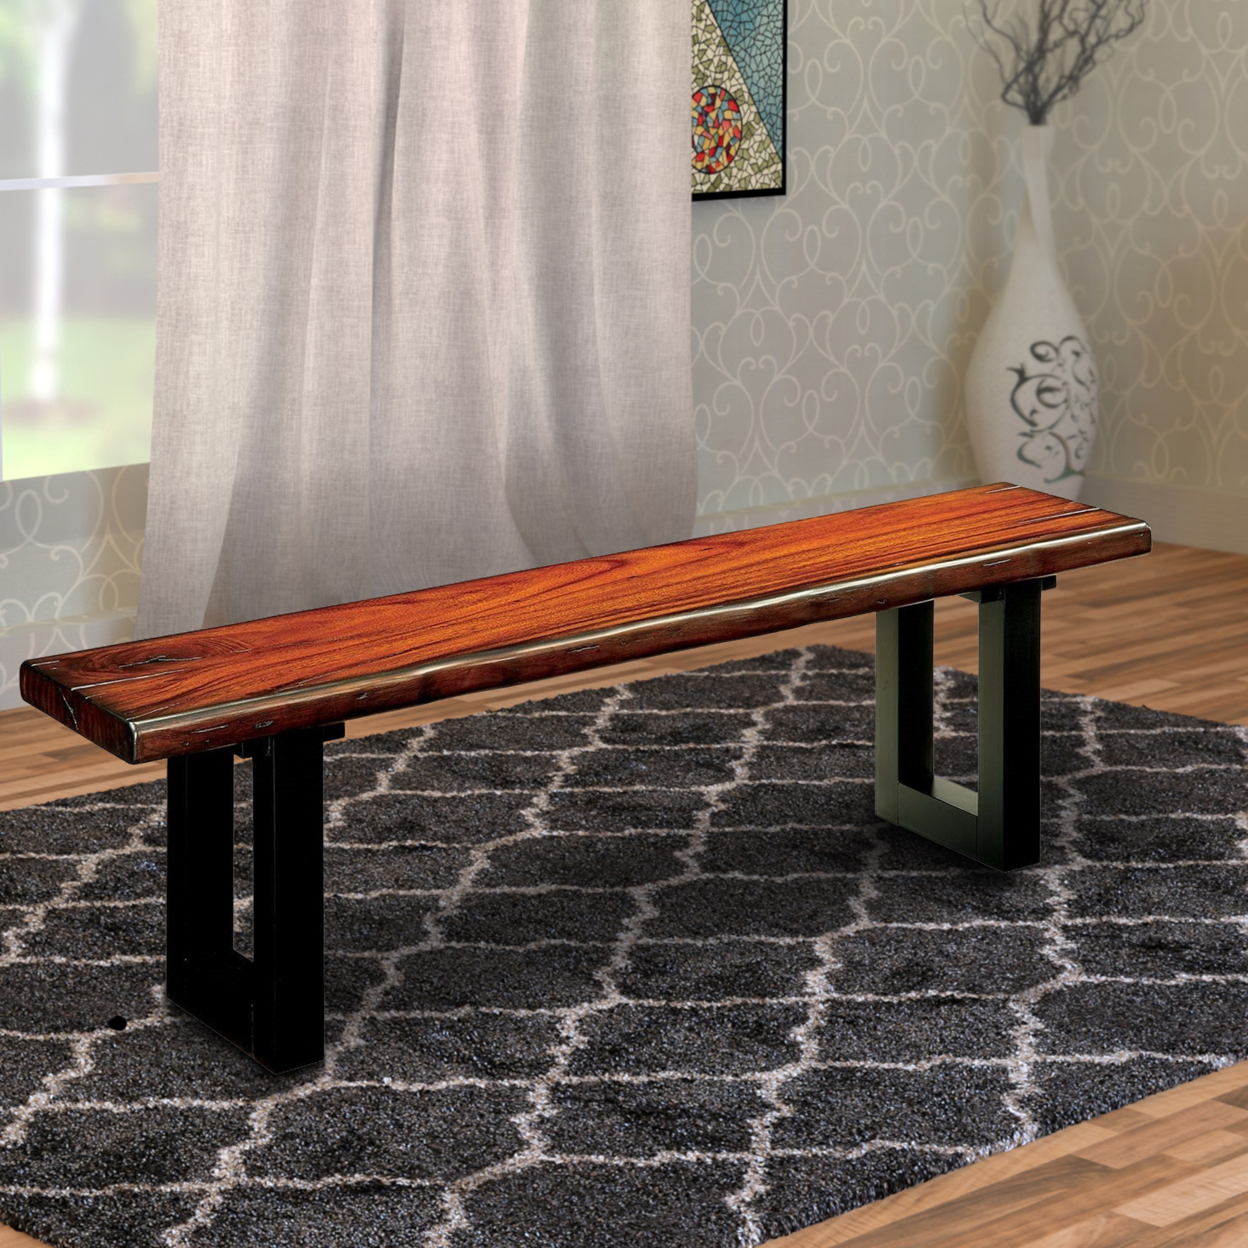 Rectangular Wooden Bench With Curved Edges And Sled Base, Brown And Black- Saltoro Sherpi